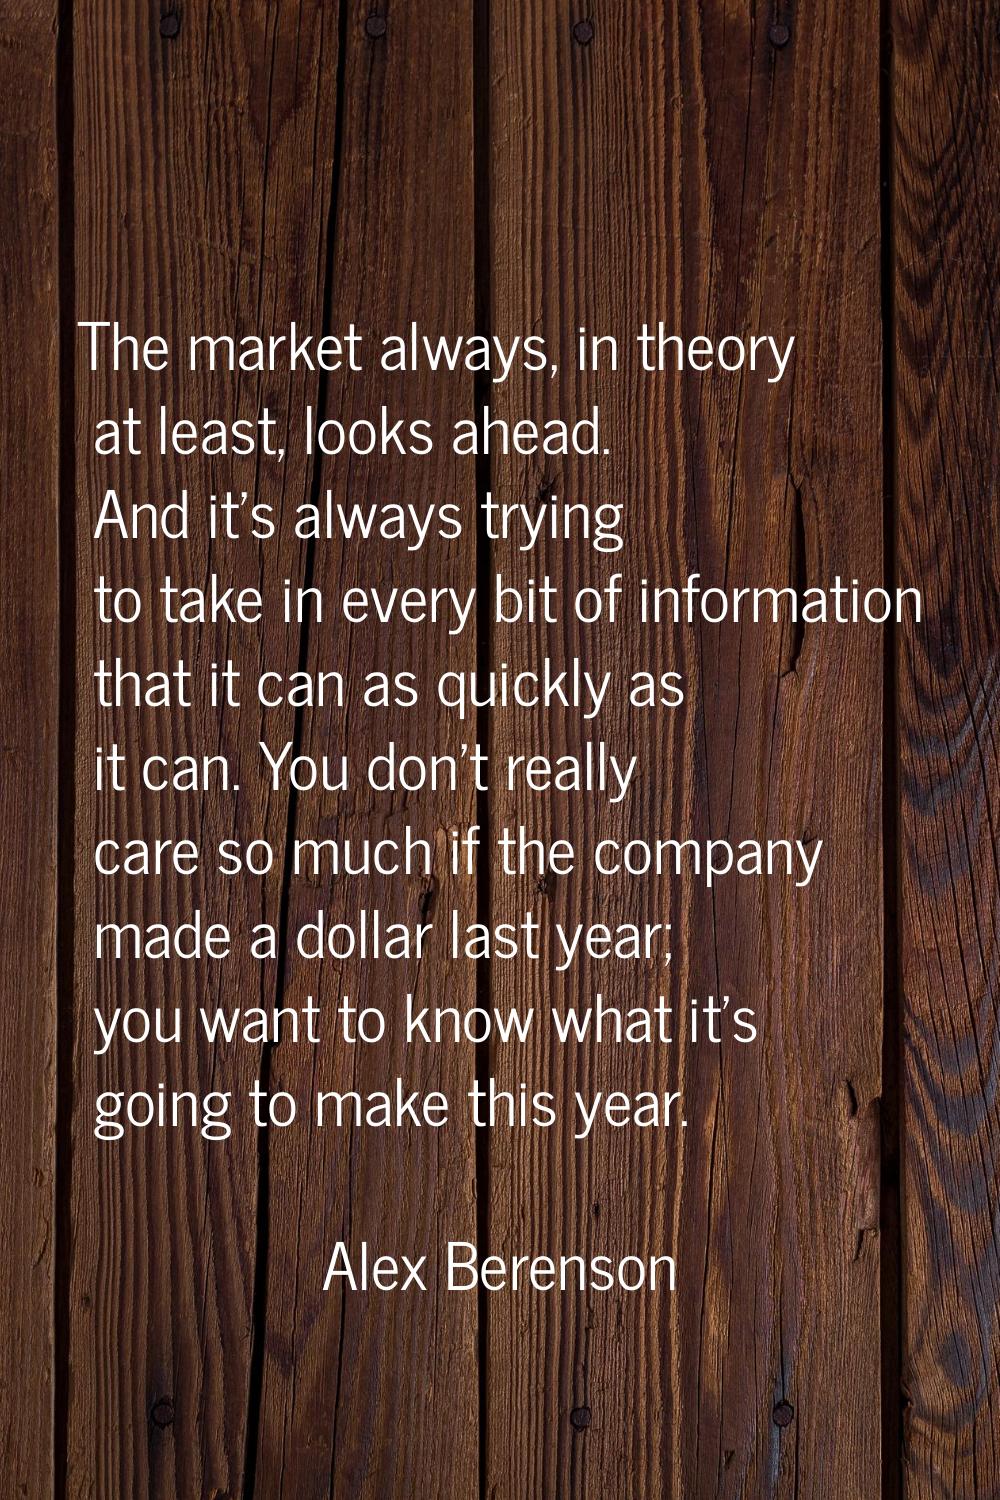 The market always, in theory at least, looks ahead. And it's always trying to take in every bit of 